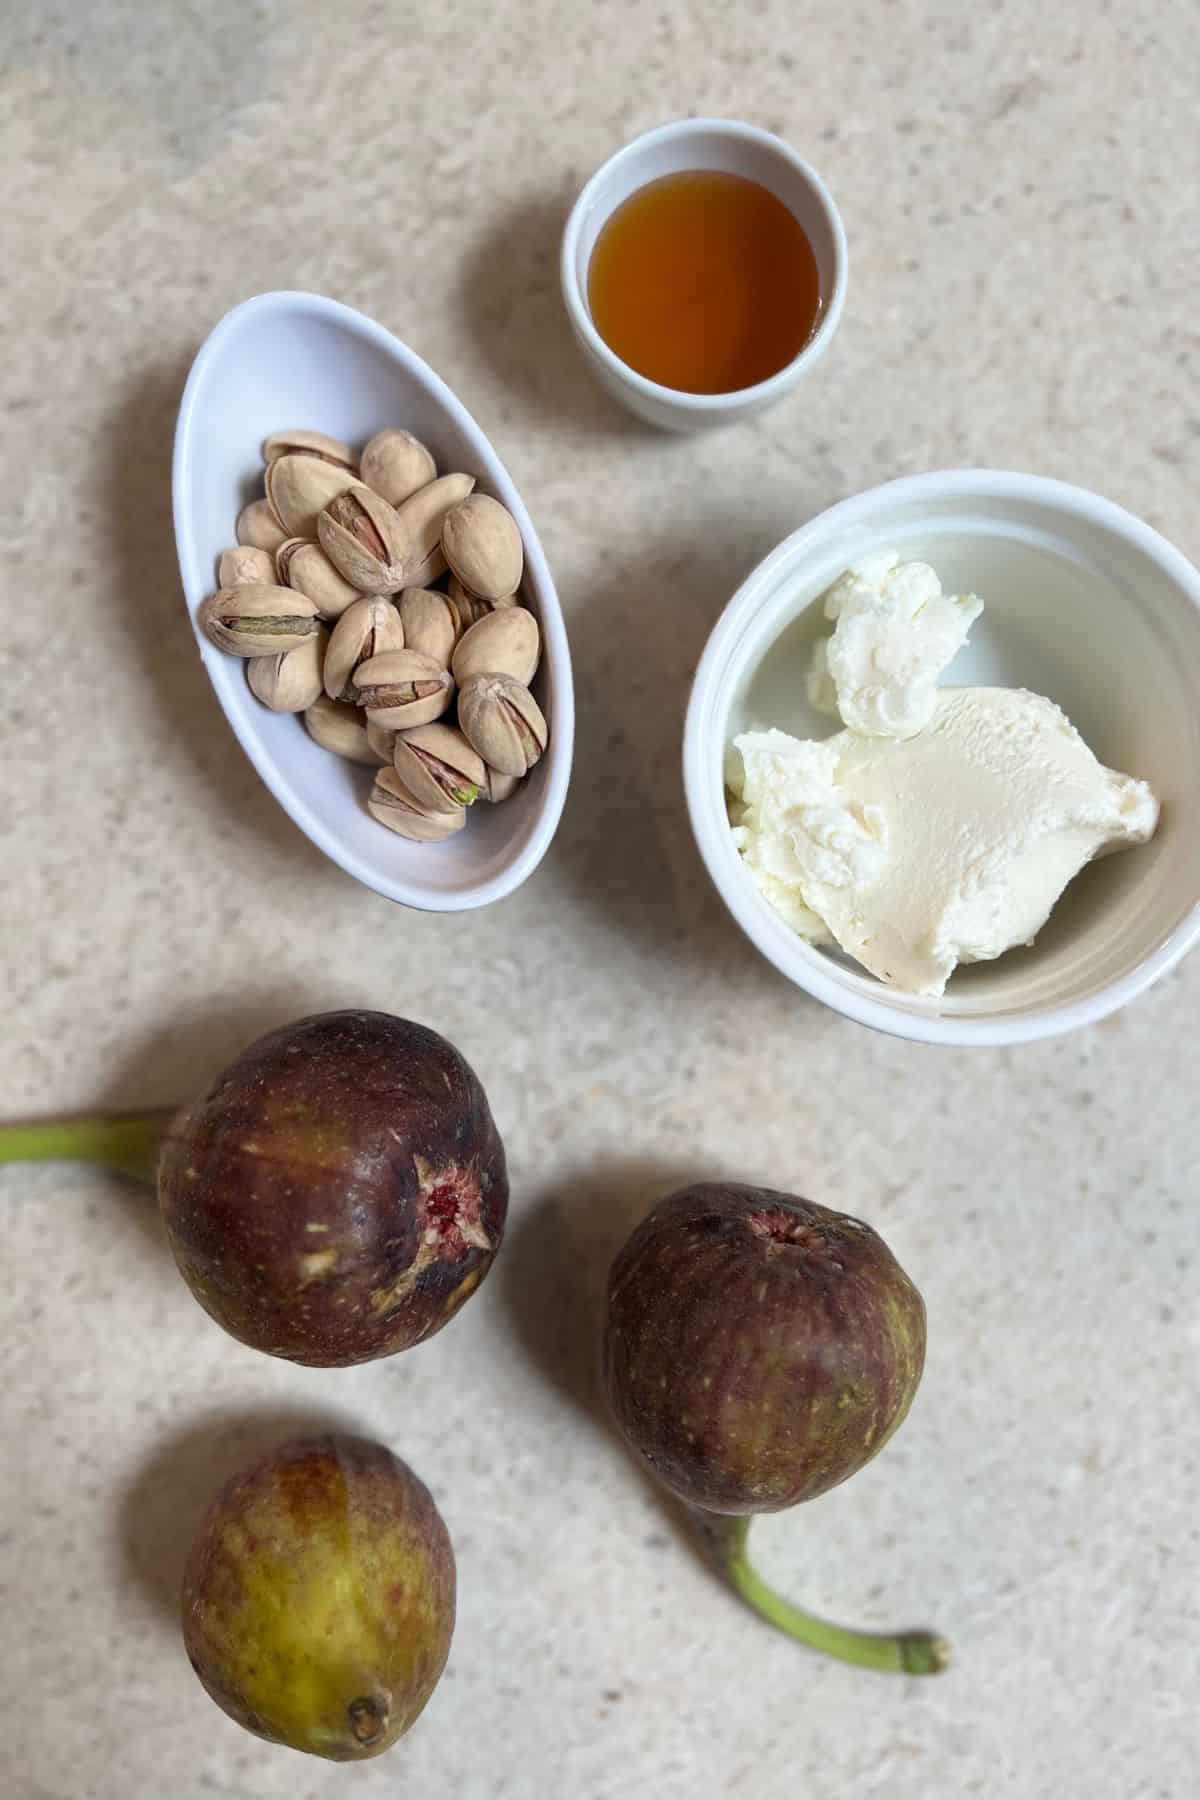 ingredients for making fig spread recipe.